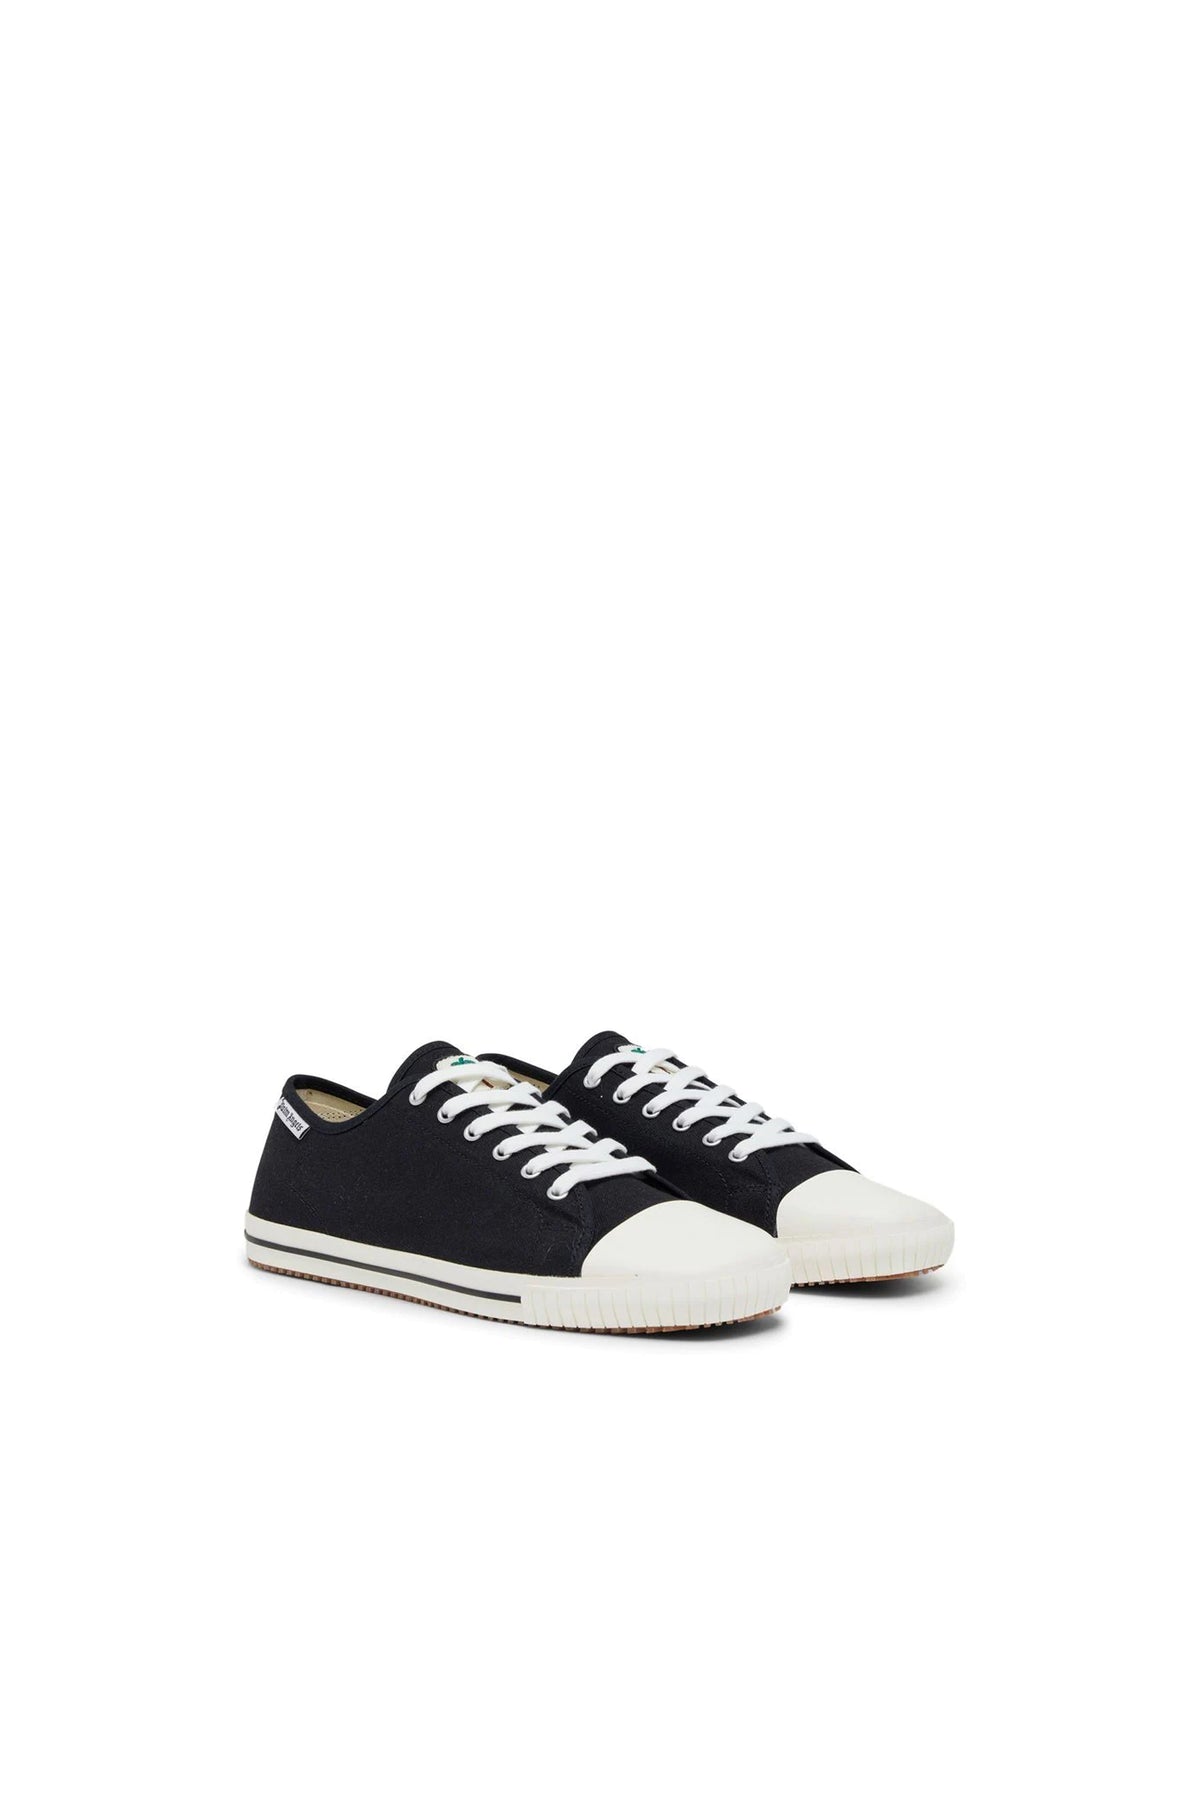 Palm Angels SQUARE LOW TOP VULCANIZED Black White